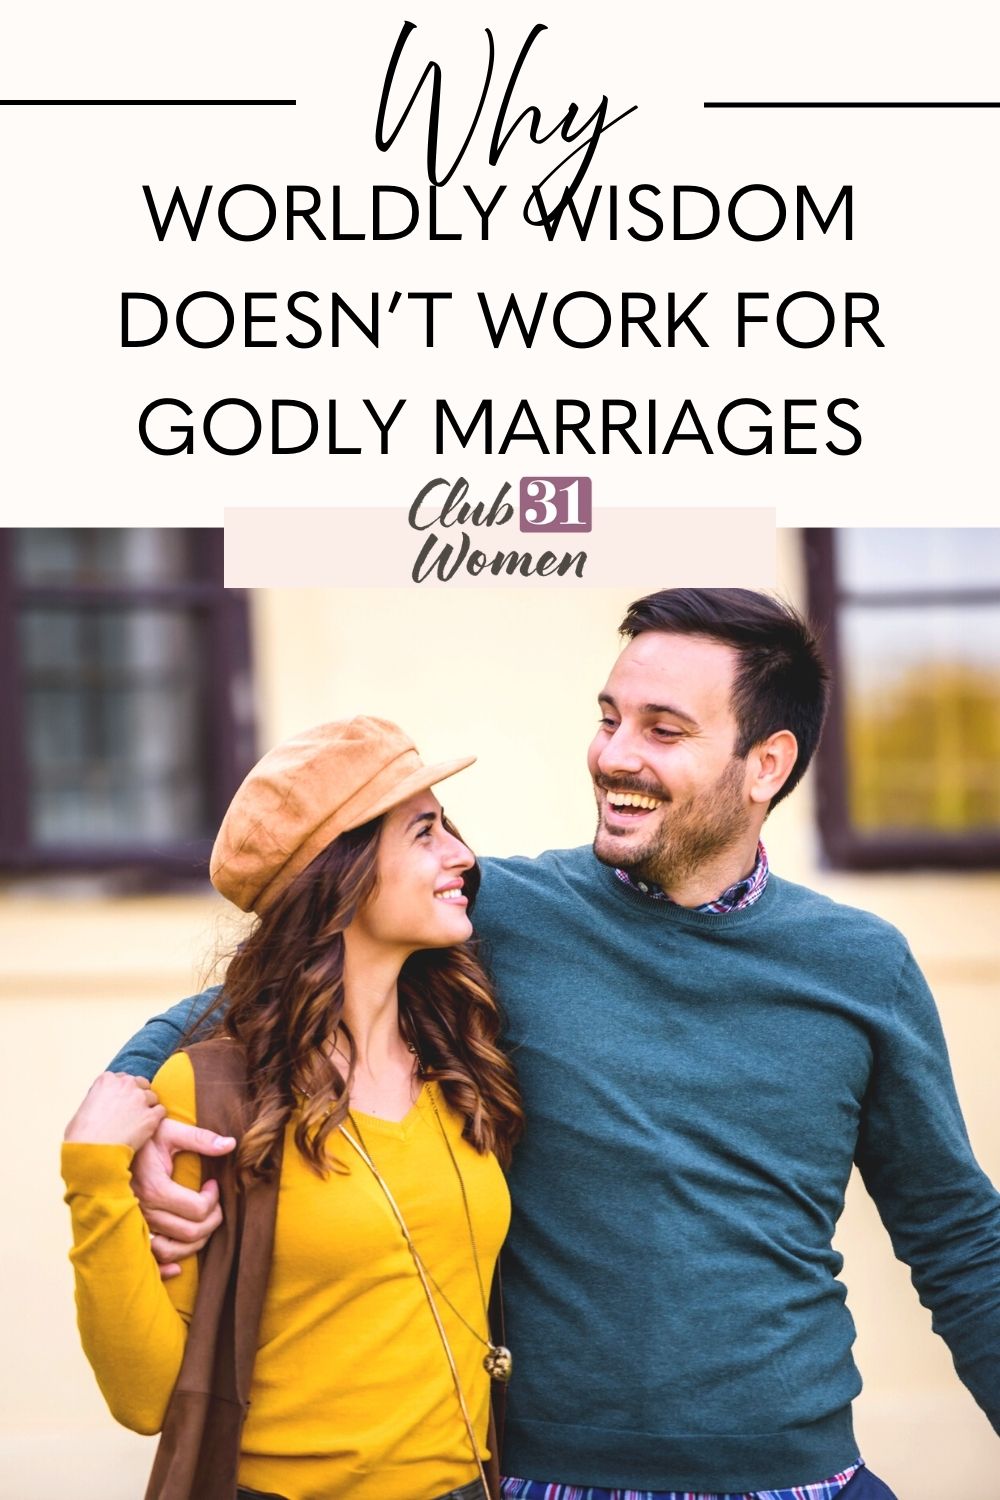 Godly marriages are set apart for the glory of God. They have specific standards laid out in Scripture to produce fruit. via @Club31Women